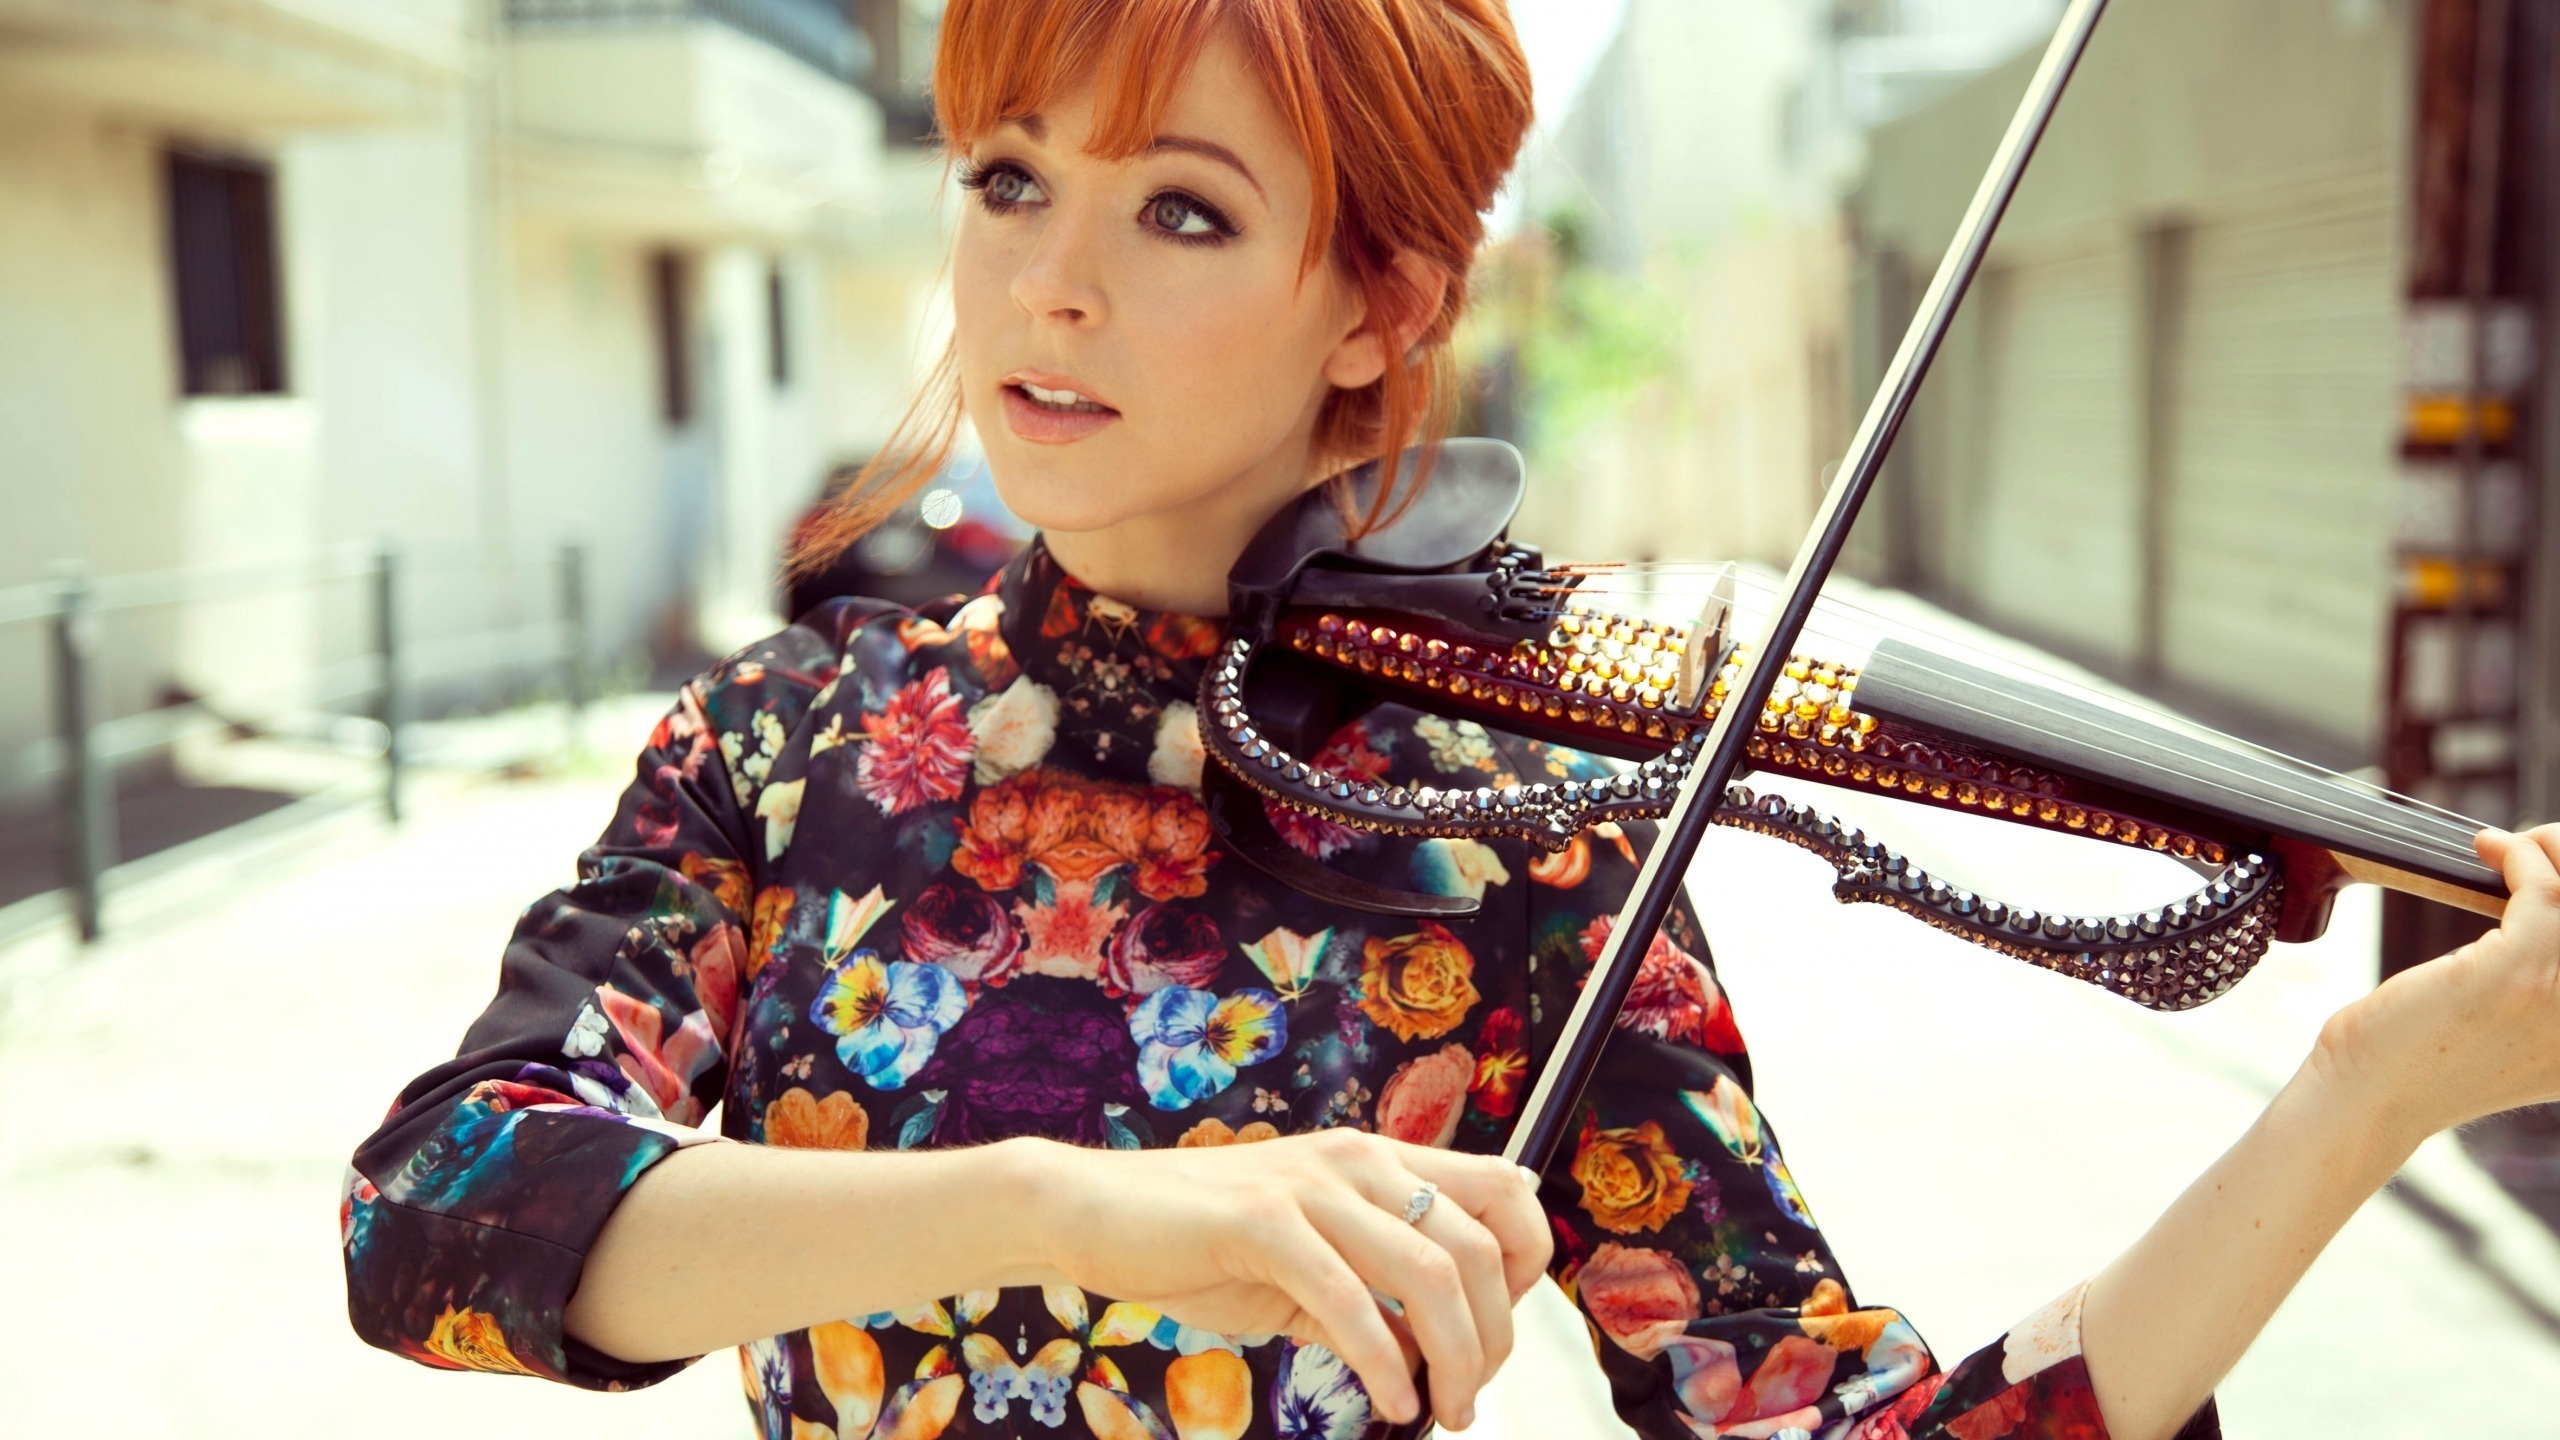 Lindsey Stirling Beautiful for 2560x1440 HDTV resolution